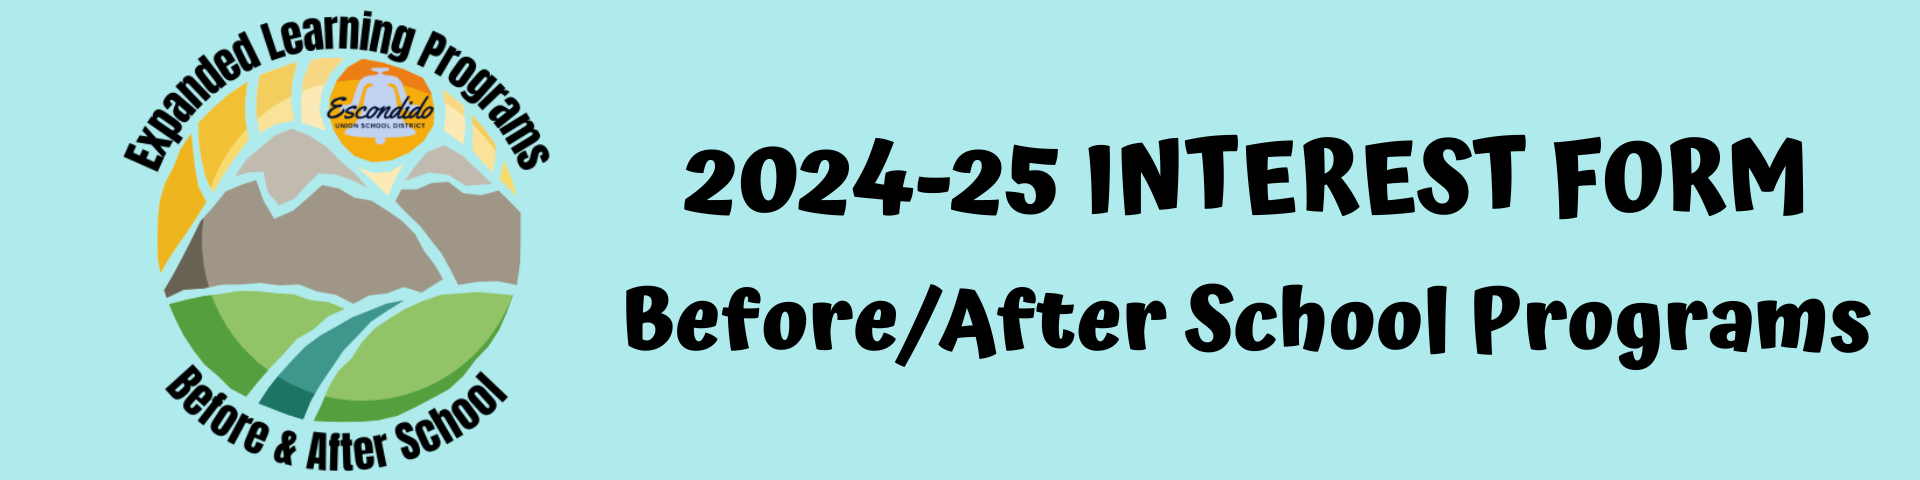 Expanded Learning Programs INTEREST FORM: 2024-25 Before & After School Programs